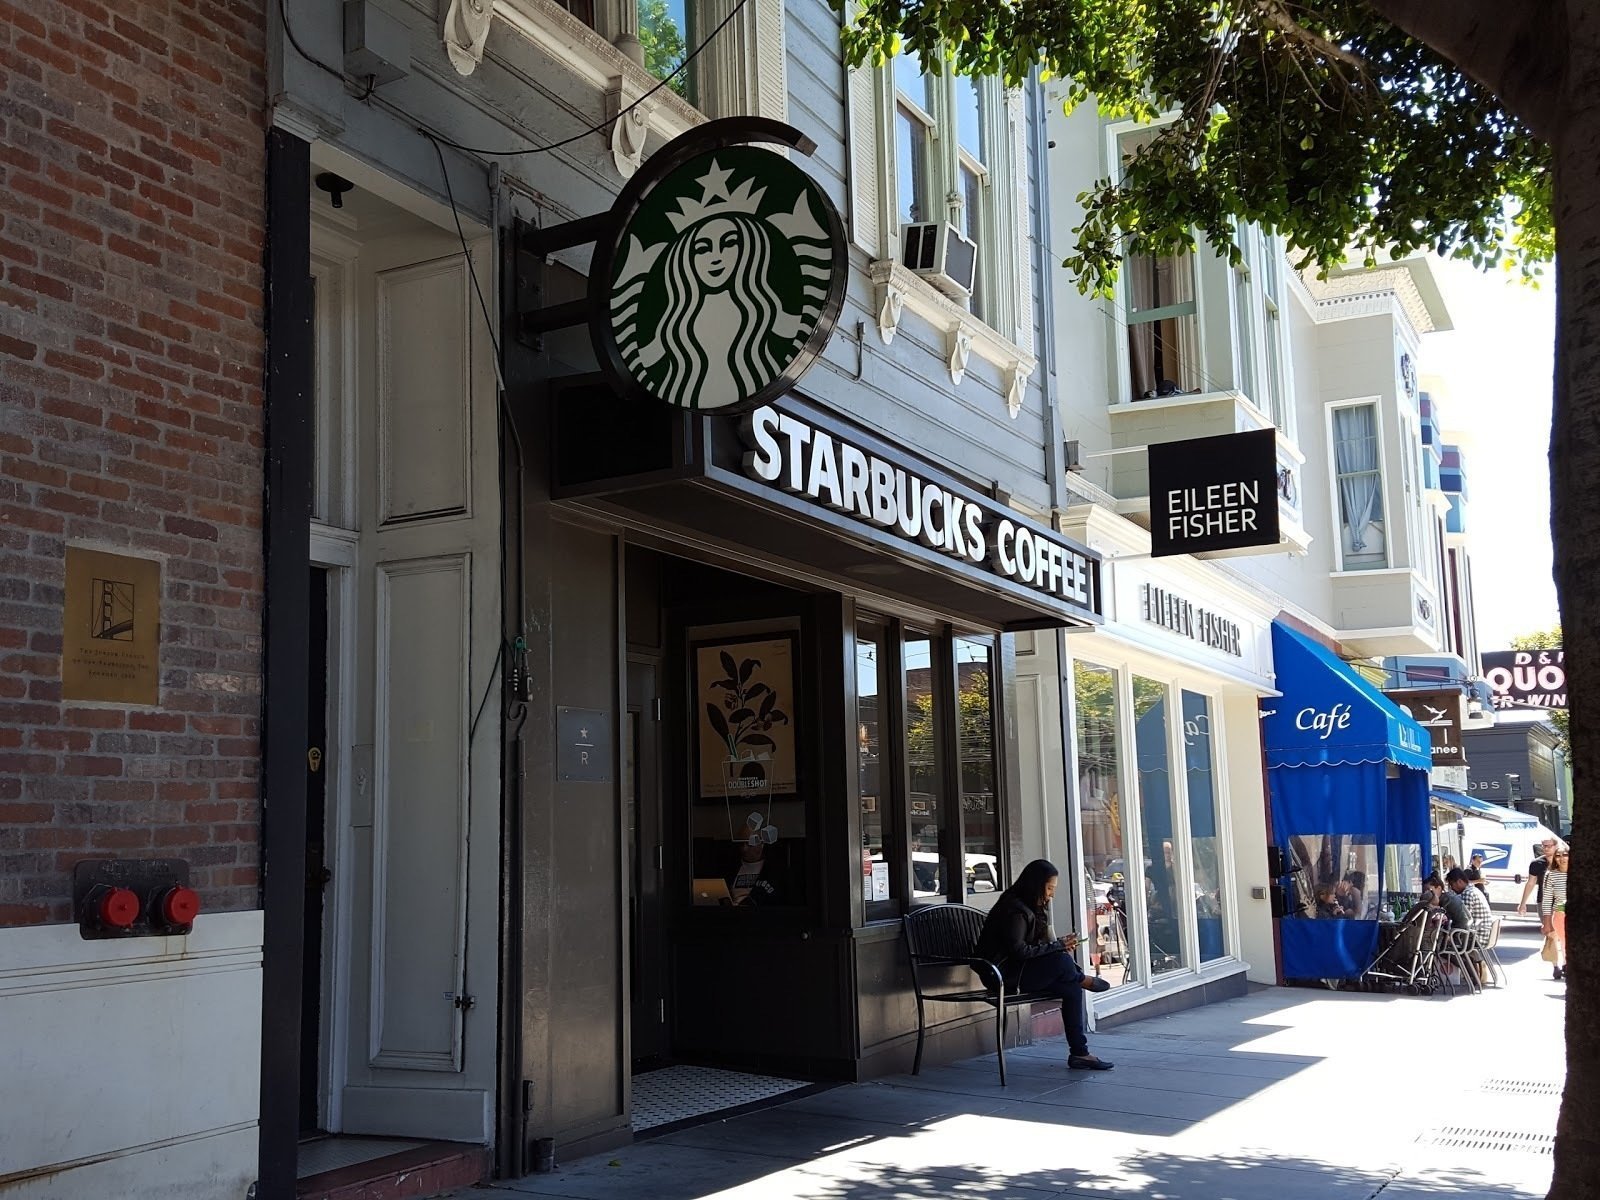 <span class="translation_missing" title="translation missing: en.meta.location_title, location_name: Starbucks @ 2222 Fillmore St, city: San Francisco">Location Title</span>